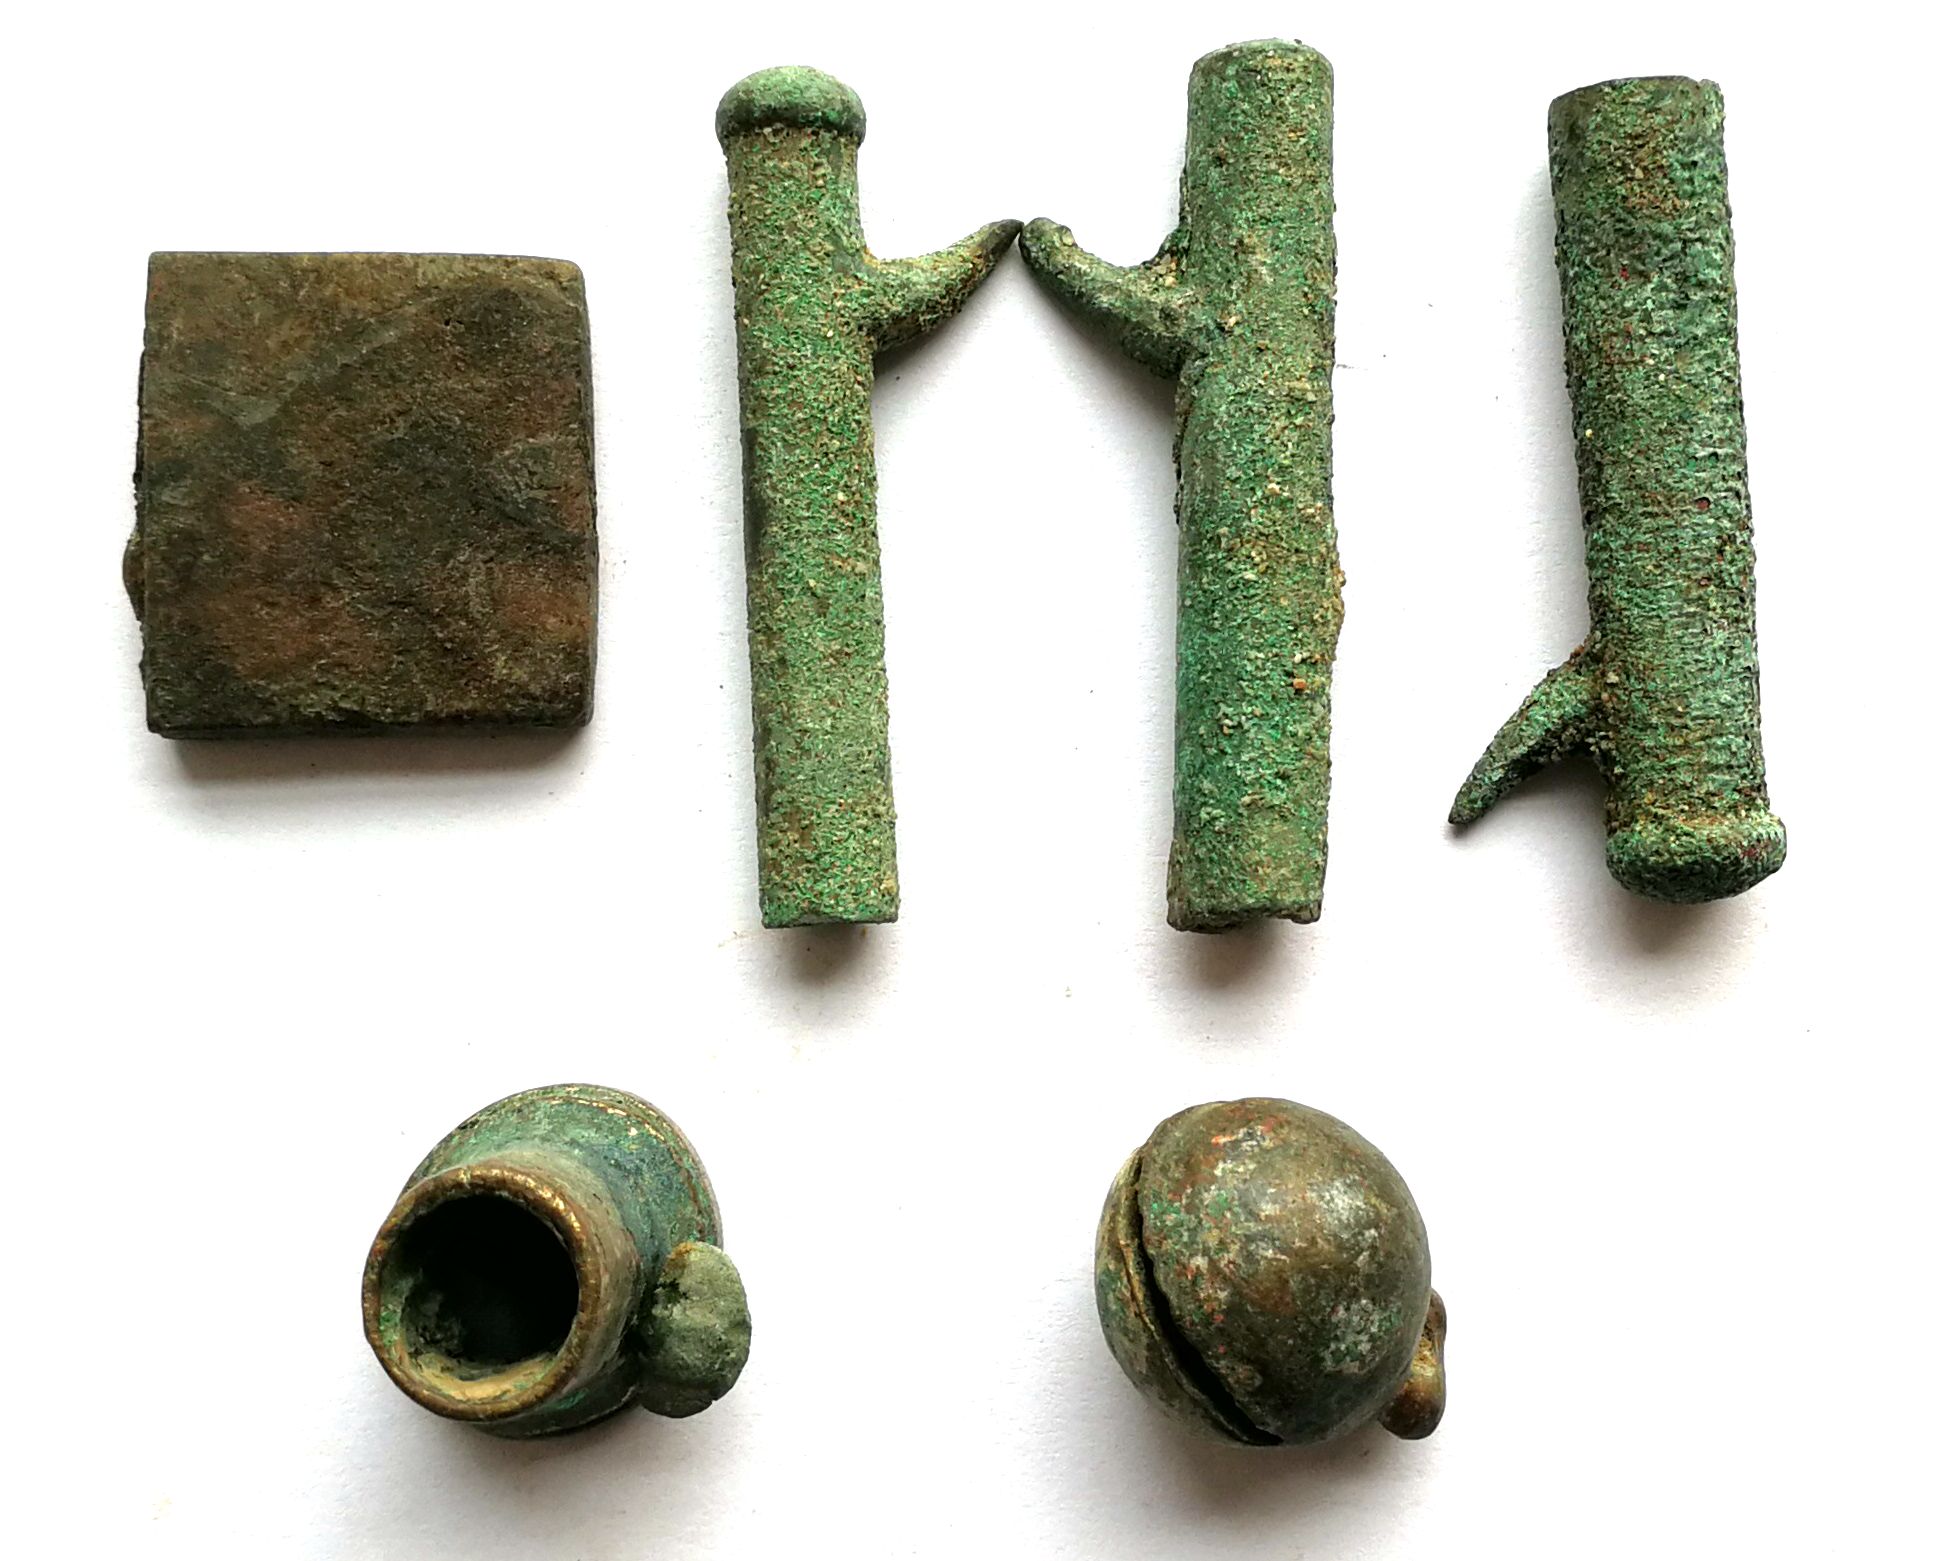 A4716, China Ancient Weapons 6 Pcs--Arrow Nock, Bell, 2000 years ago